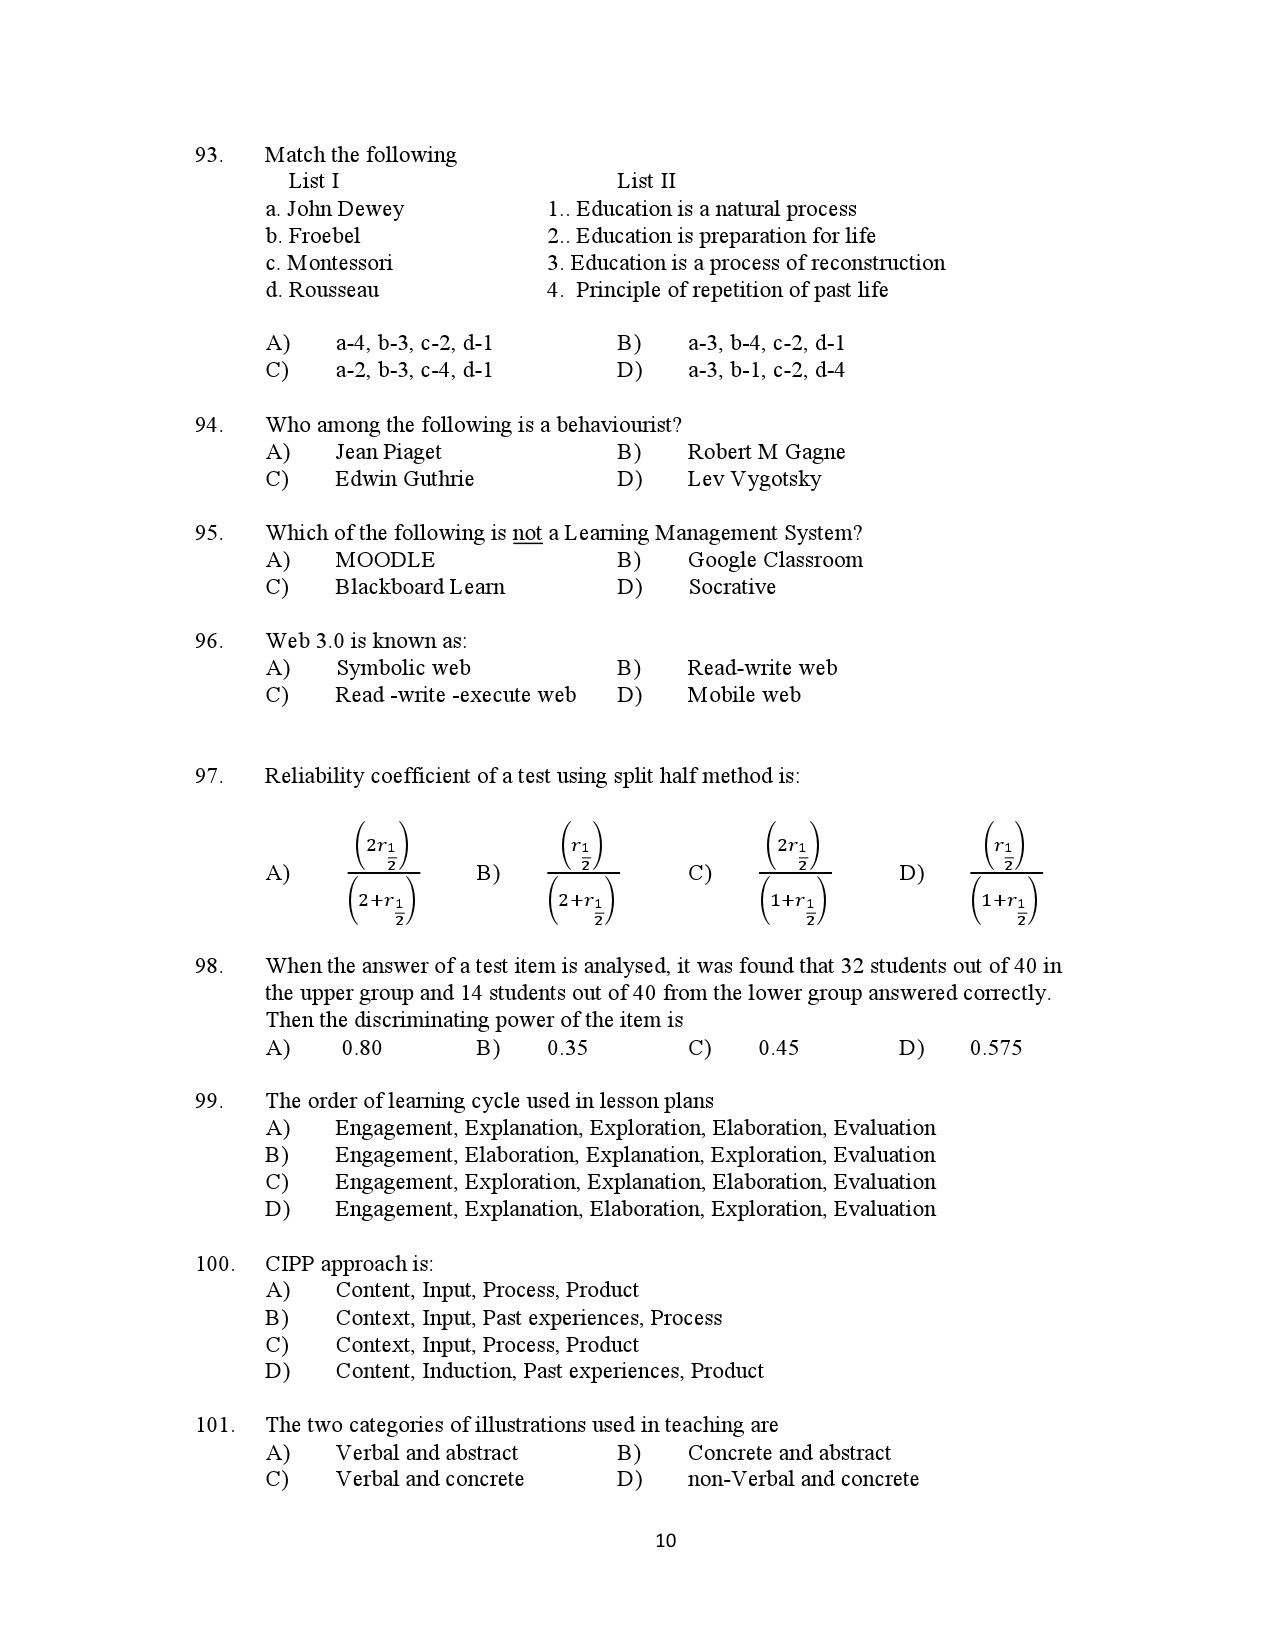 Kerala SET General Knowledge Exam Question Paper July 2021 10